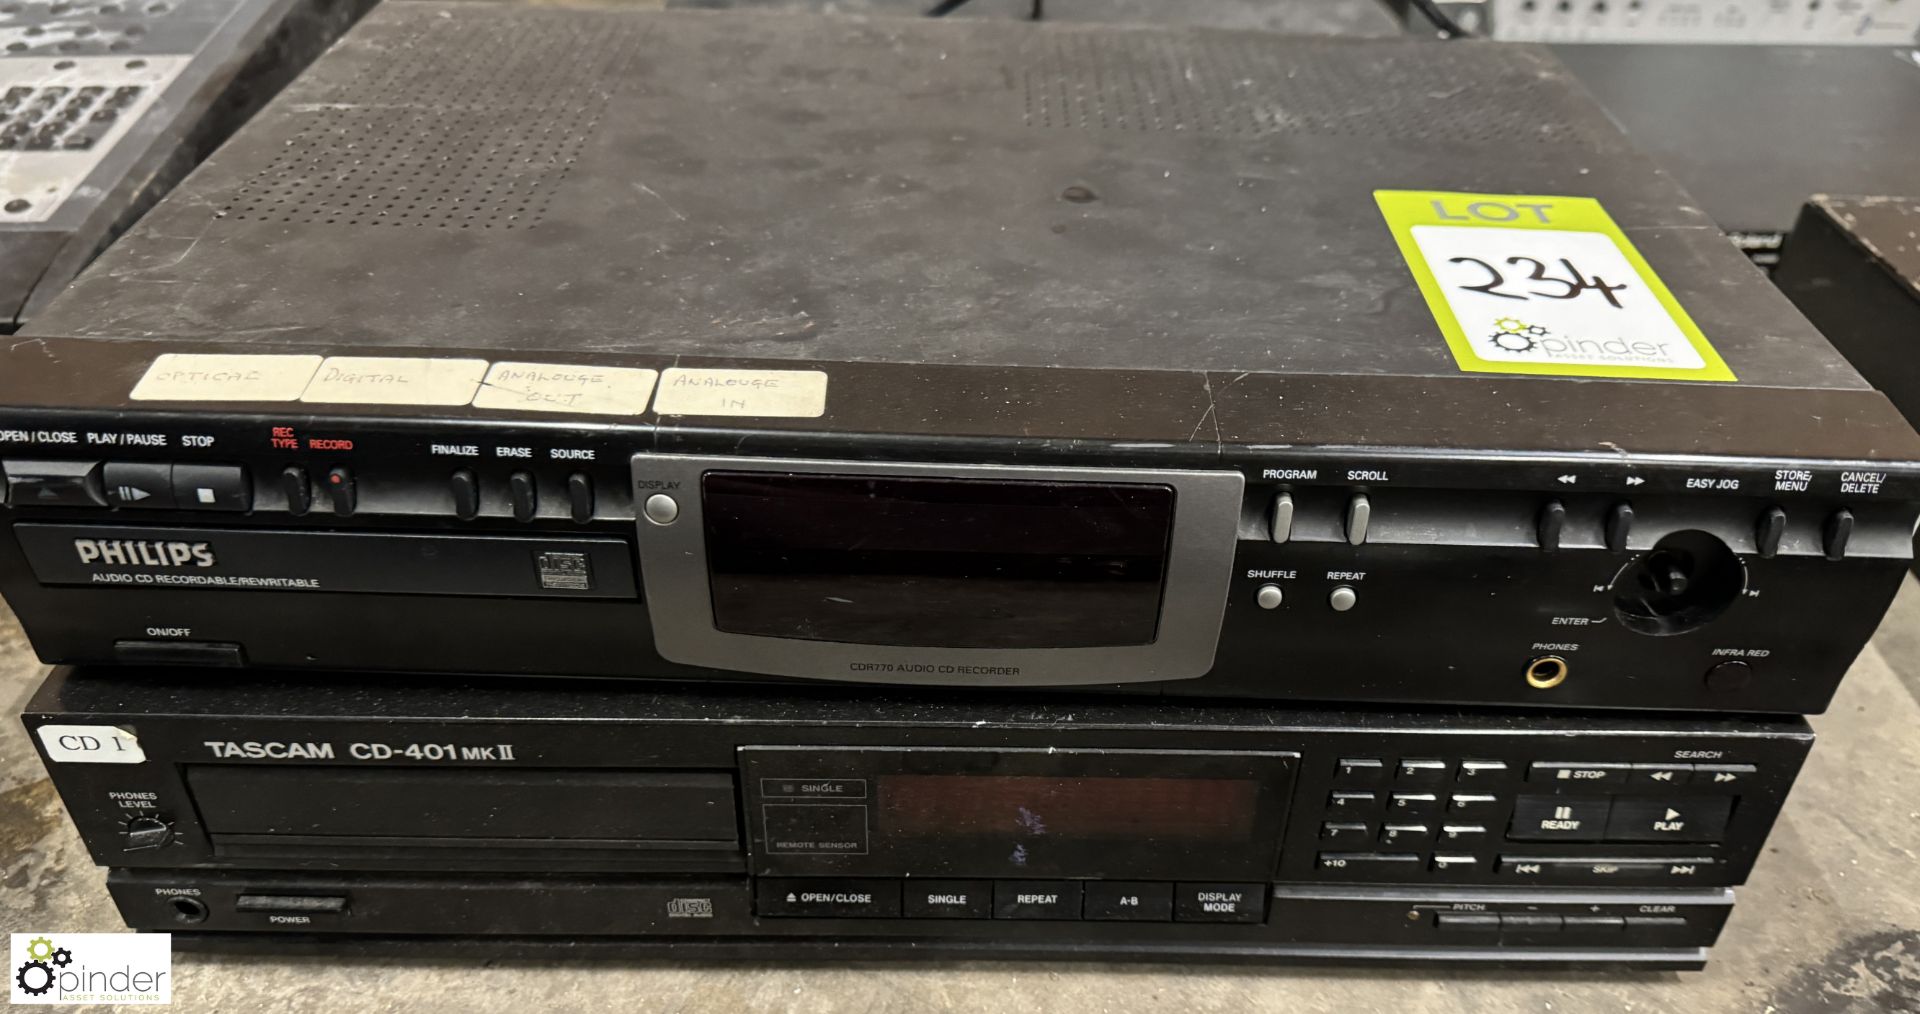 Philips CD Recorder and Tascam CD-401 MKII CD Deck